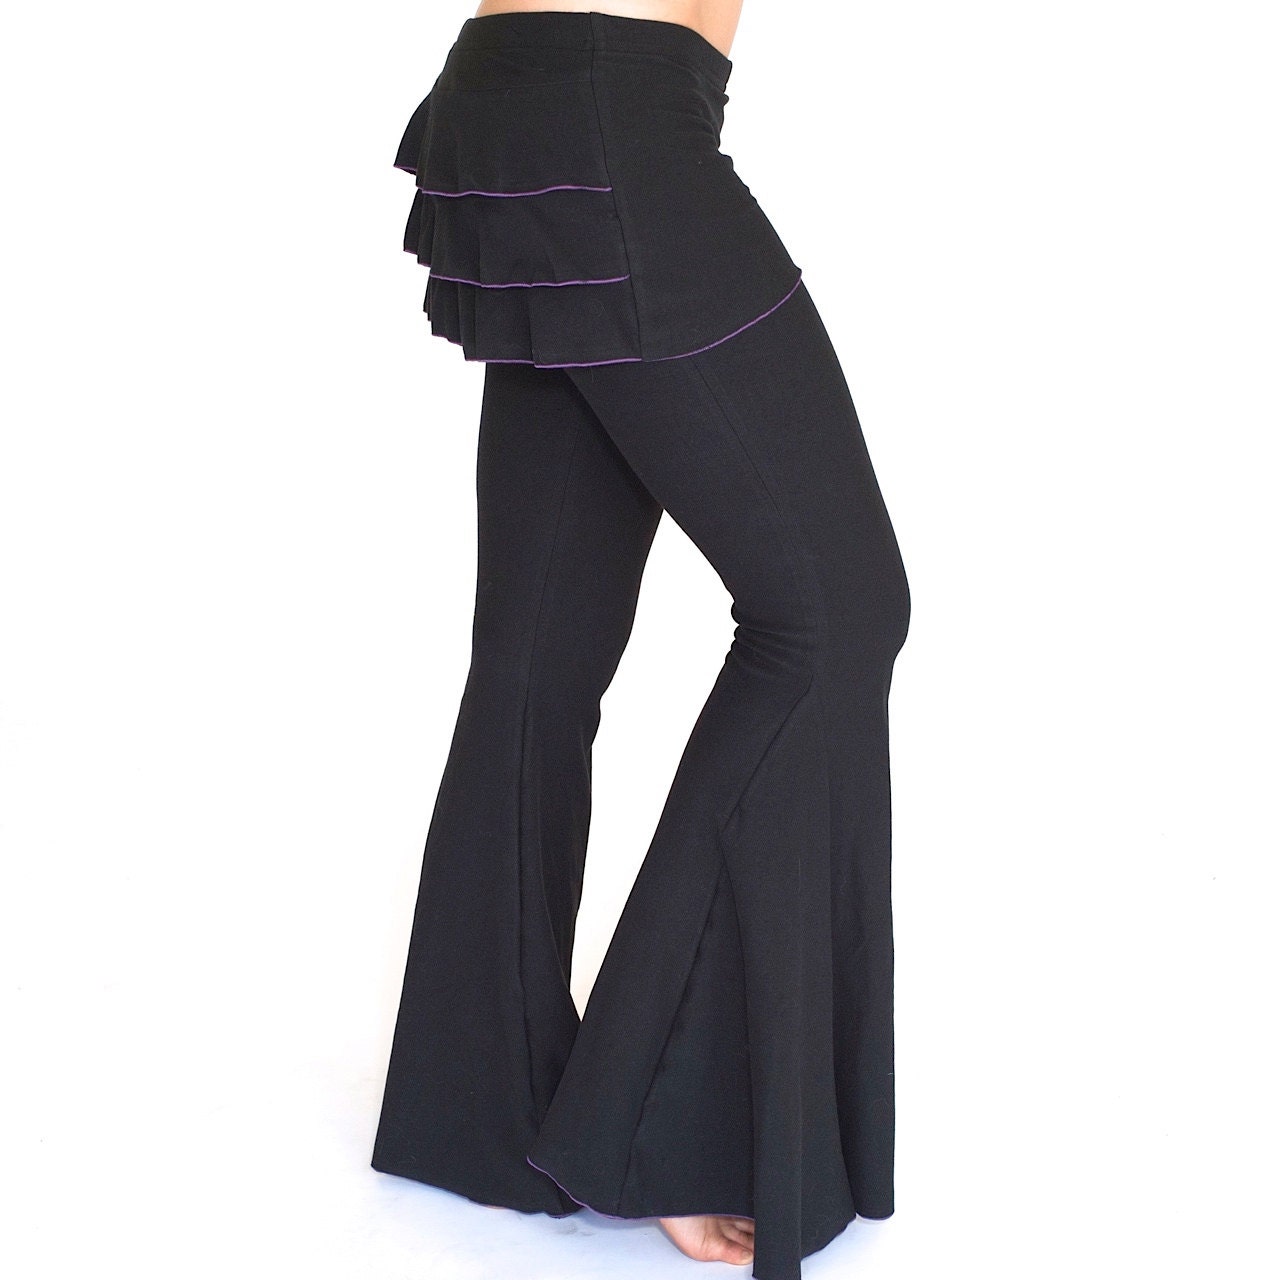 Womens Ruffle pants with attached ruffle skirt BUSTLE PANTS